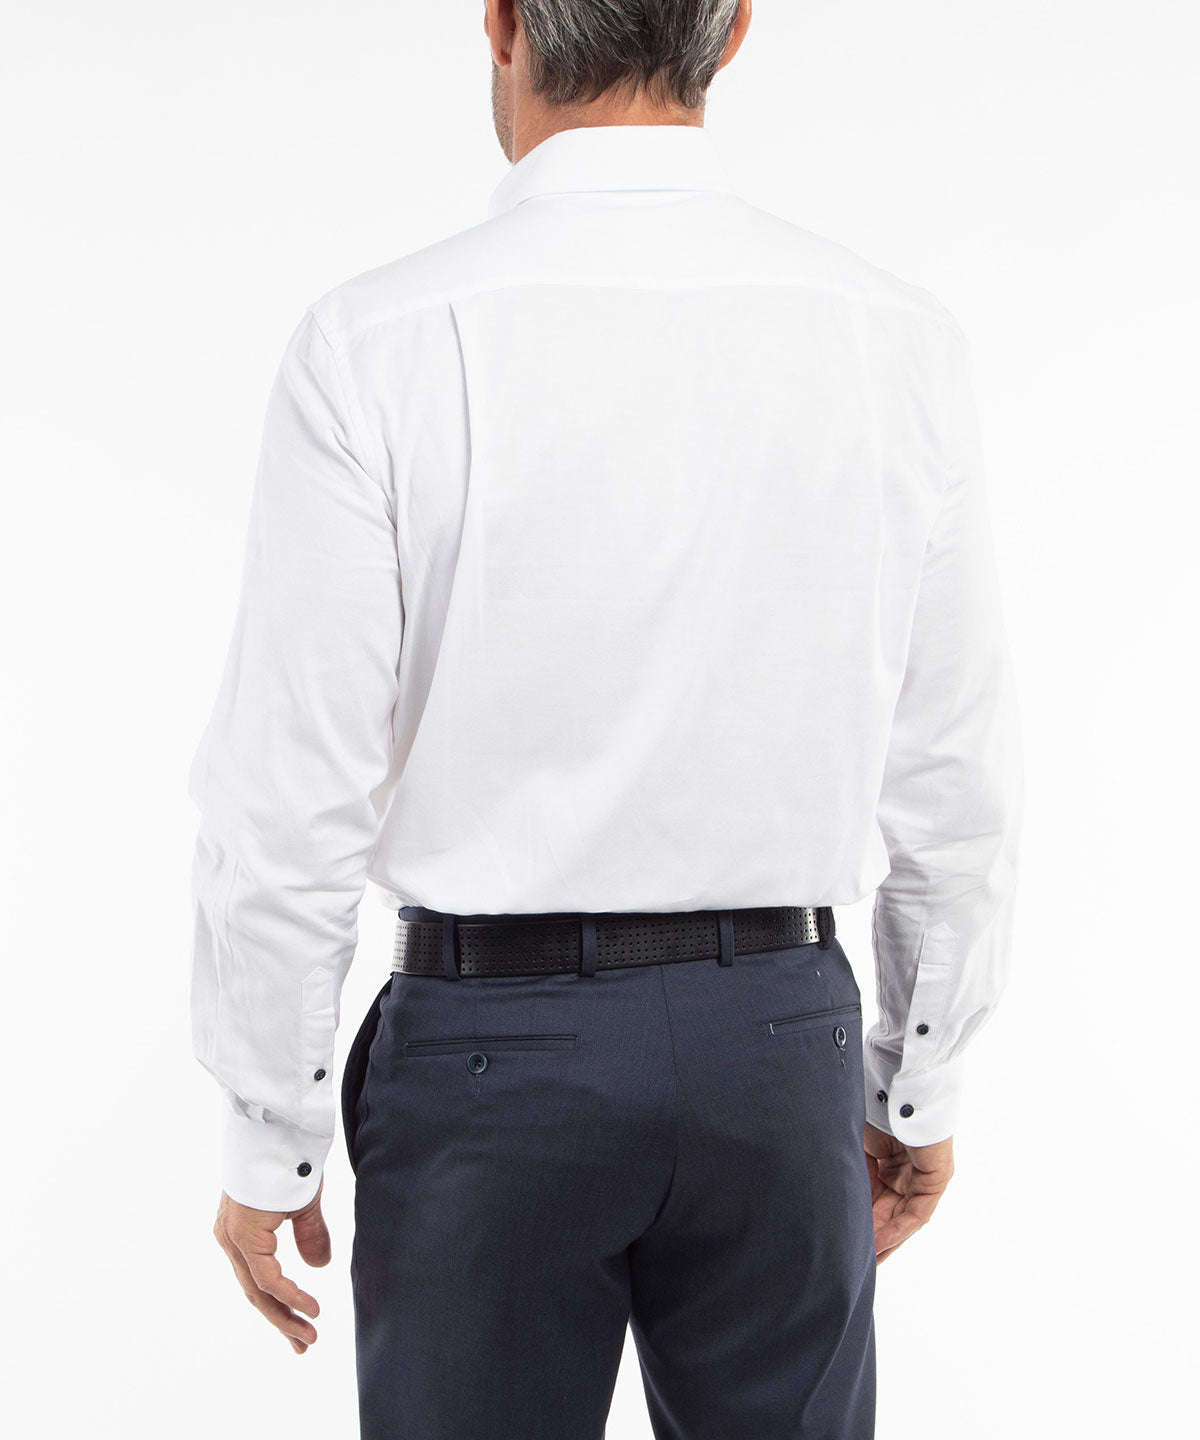 Signature Oxford Long Sleeve Sport Shirt with Contrast Buttons